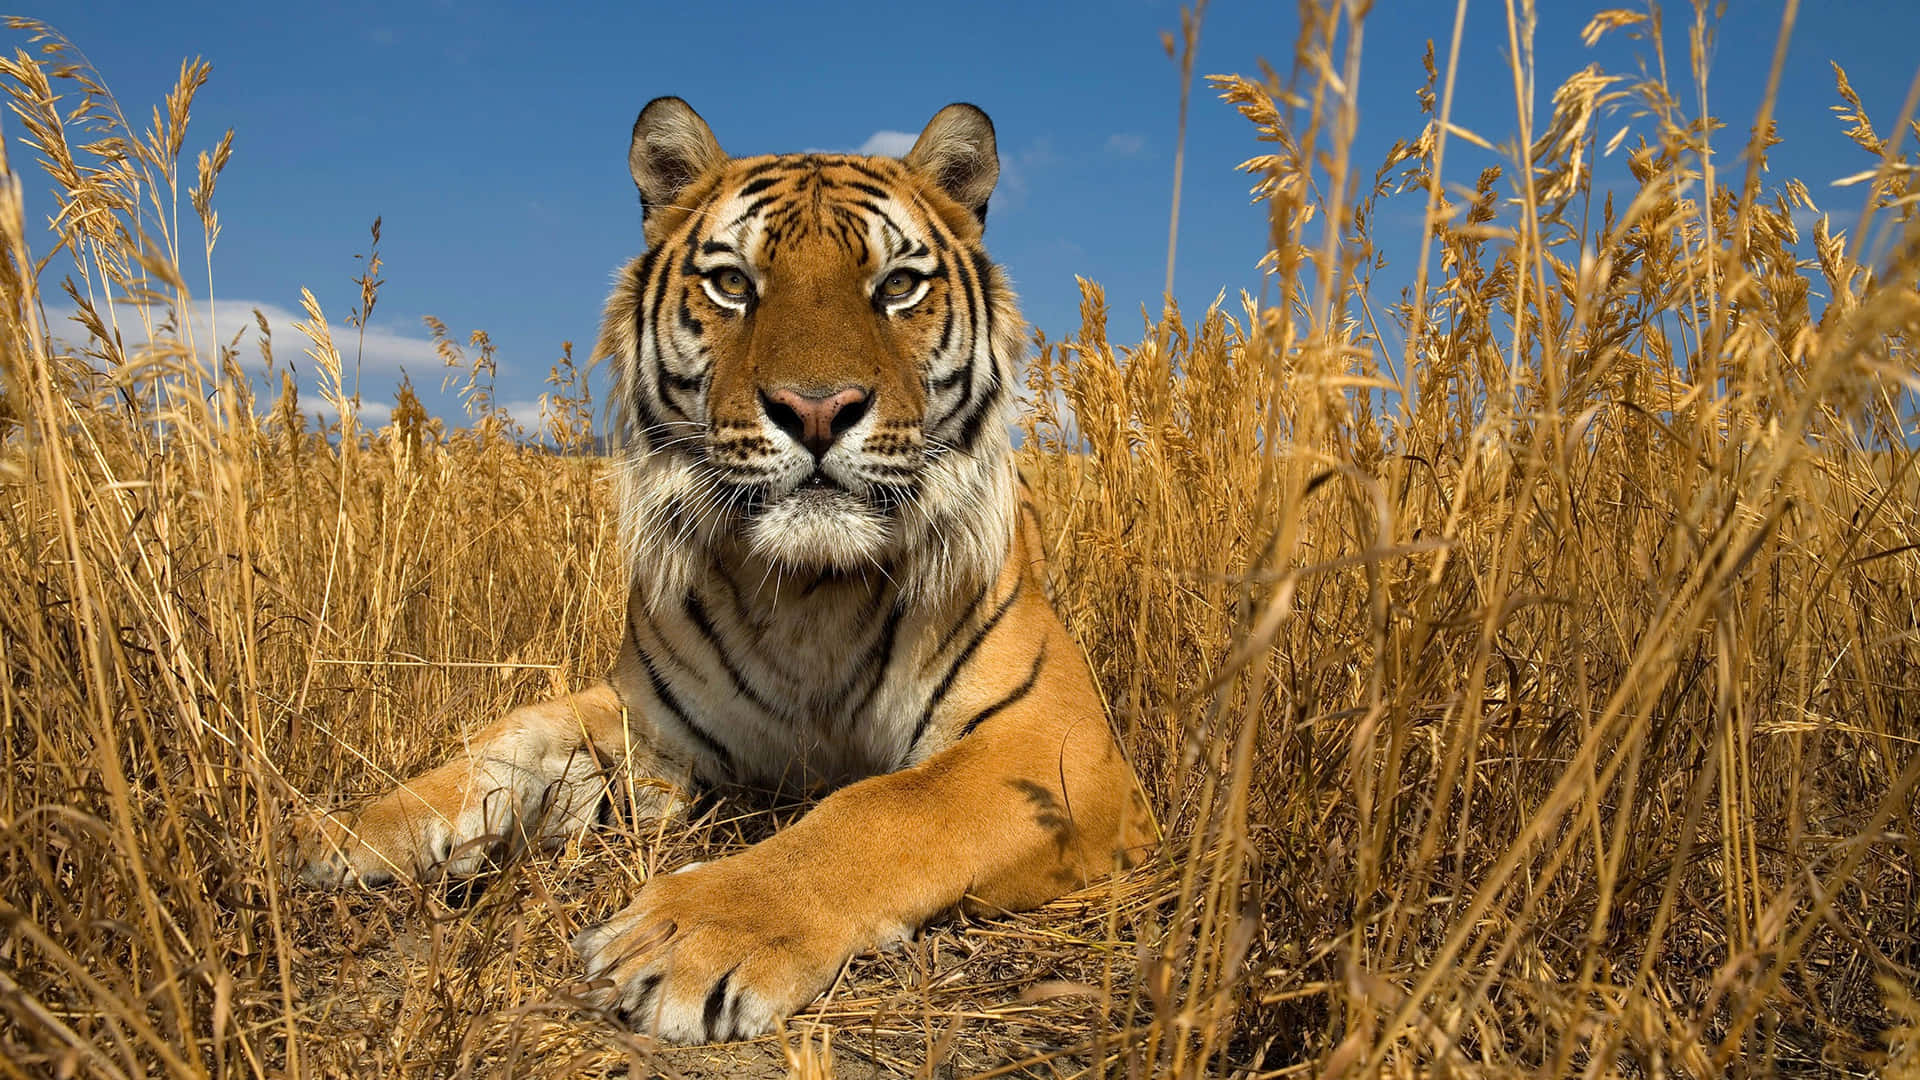 Wild Animals Tiger In Tall Grass Picture